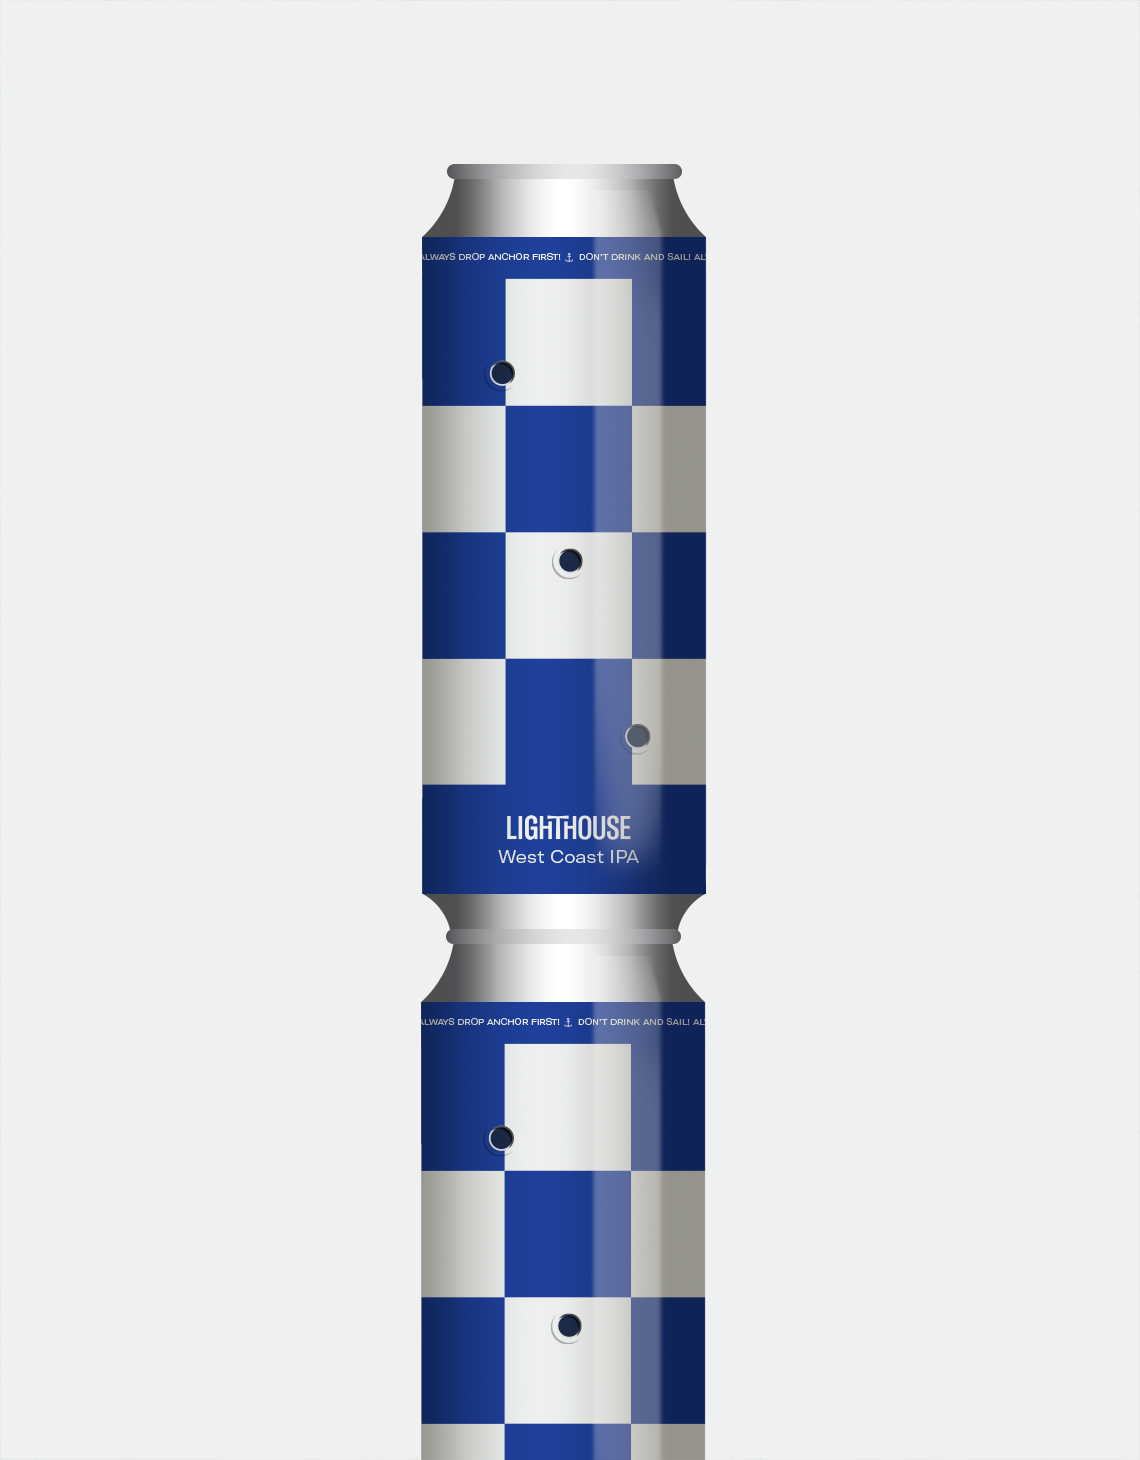 Lighthouse-Beer-Checkered_Cans-Piled